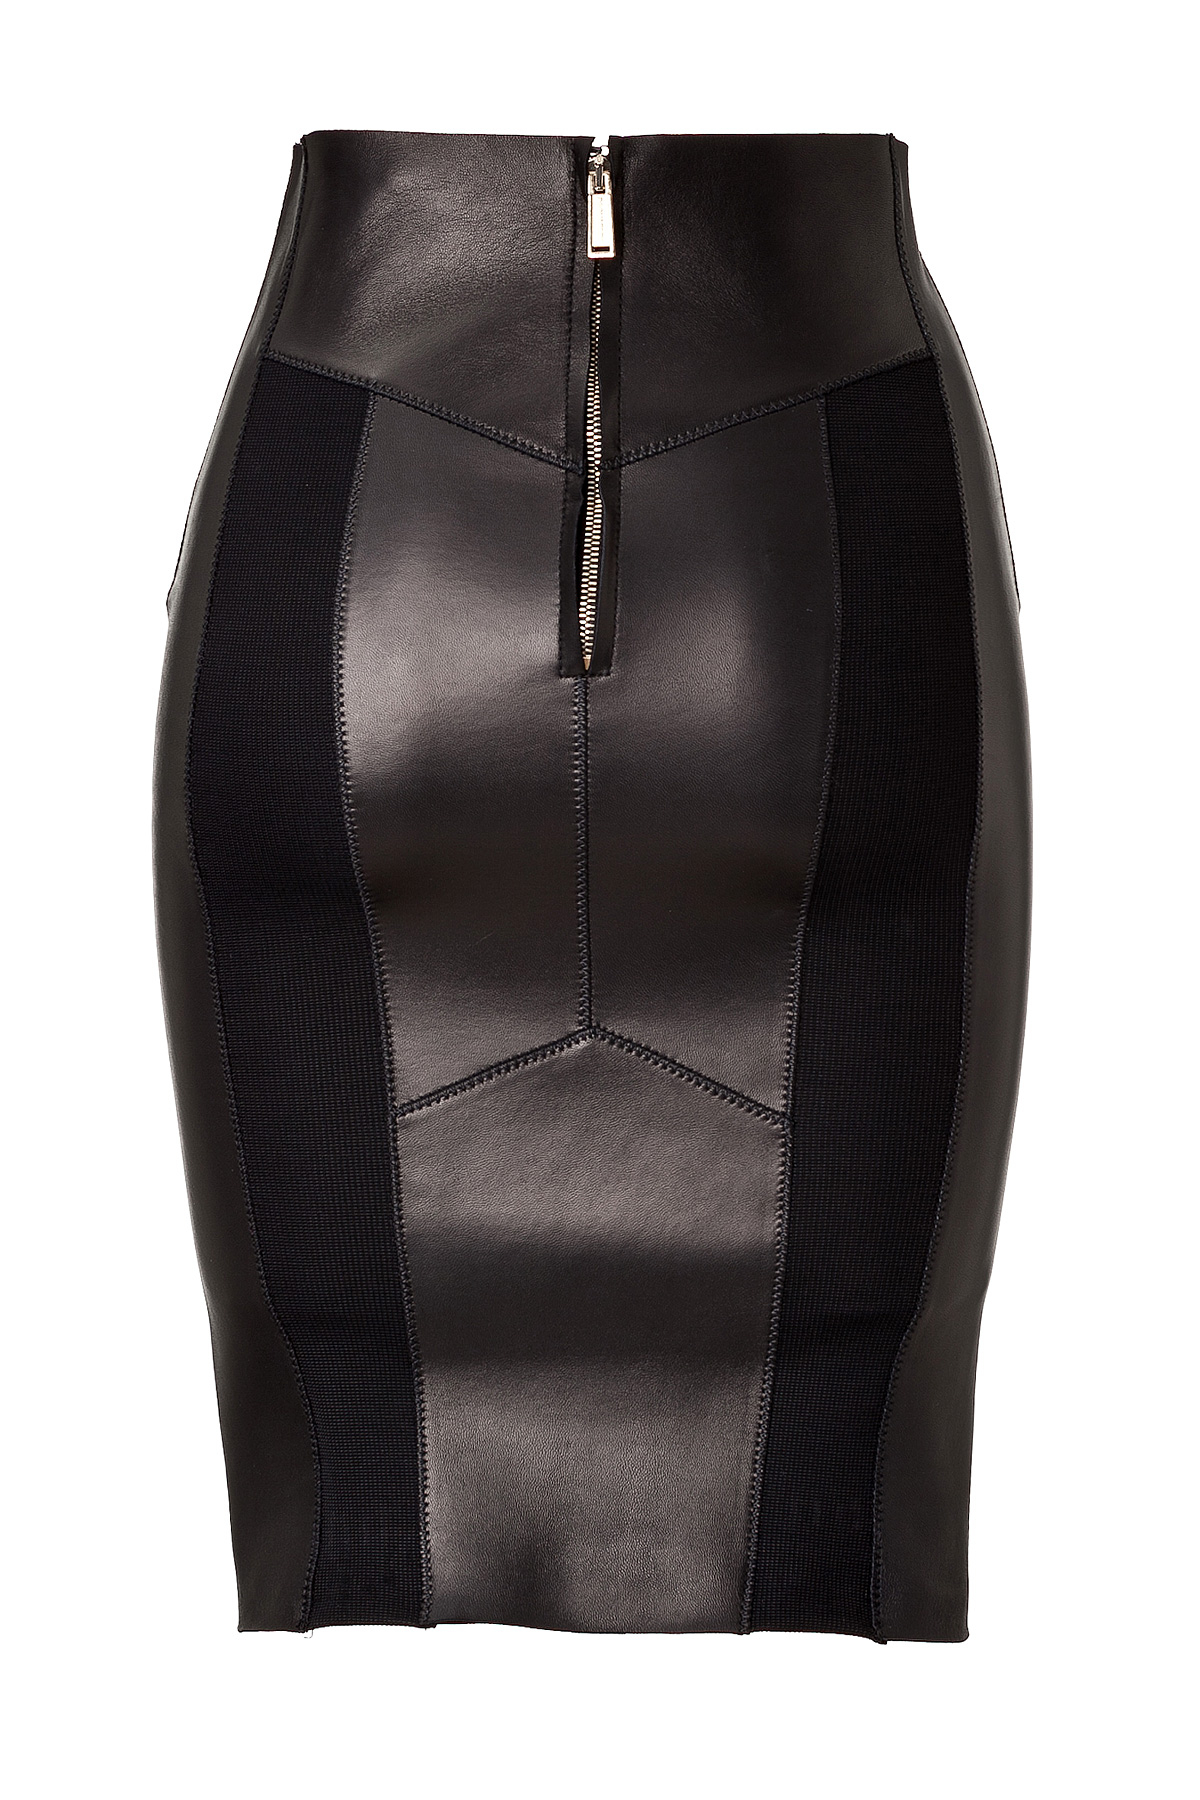 Lyst - Dsquared² Leather Pencil Skirt in Black